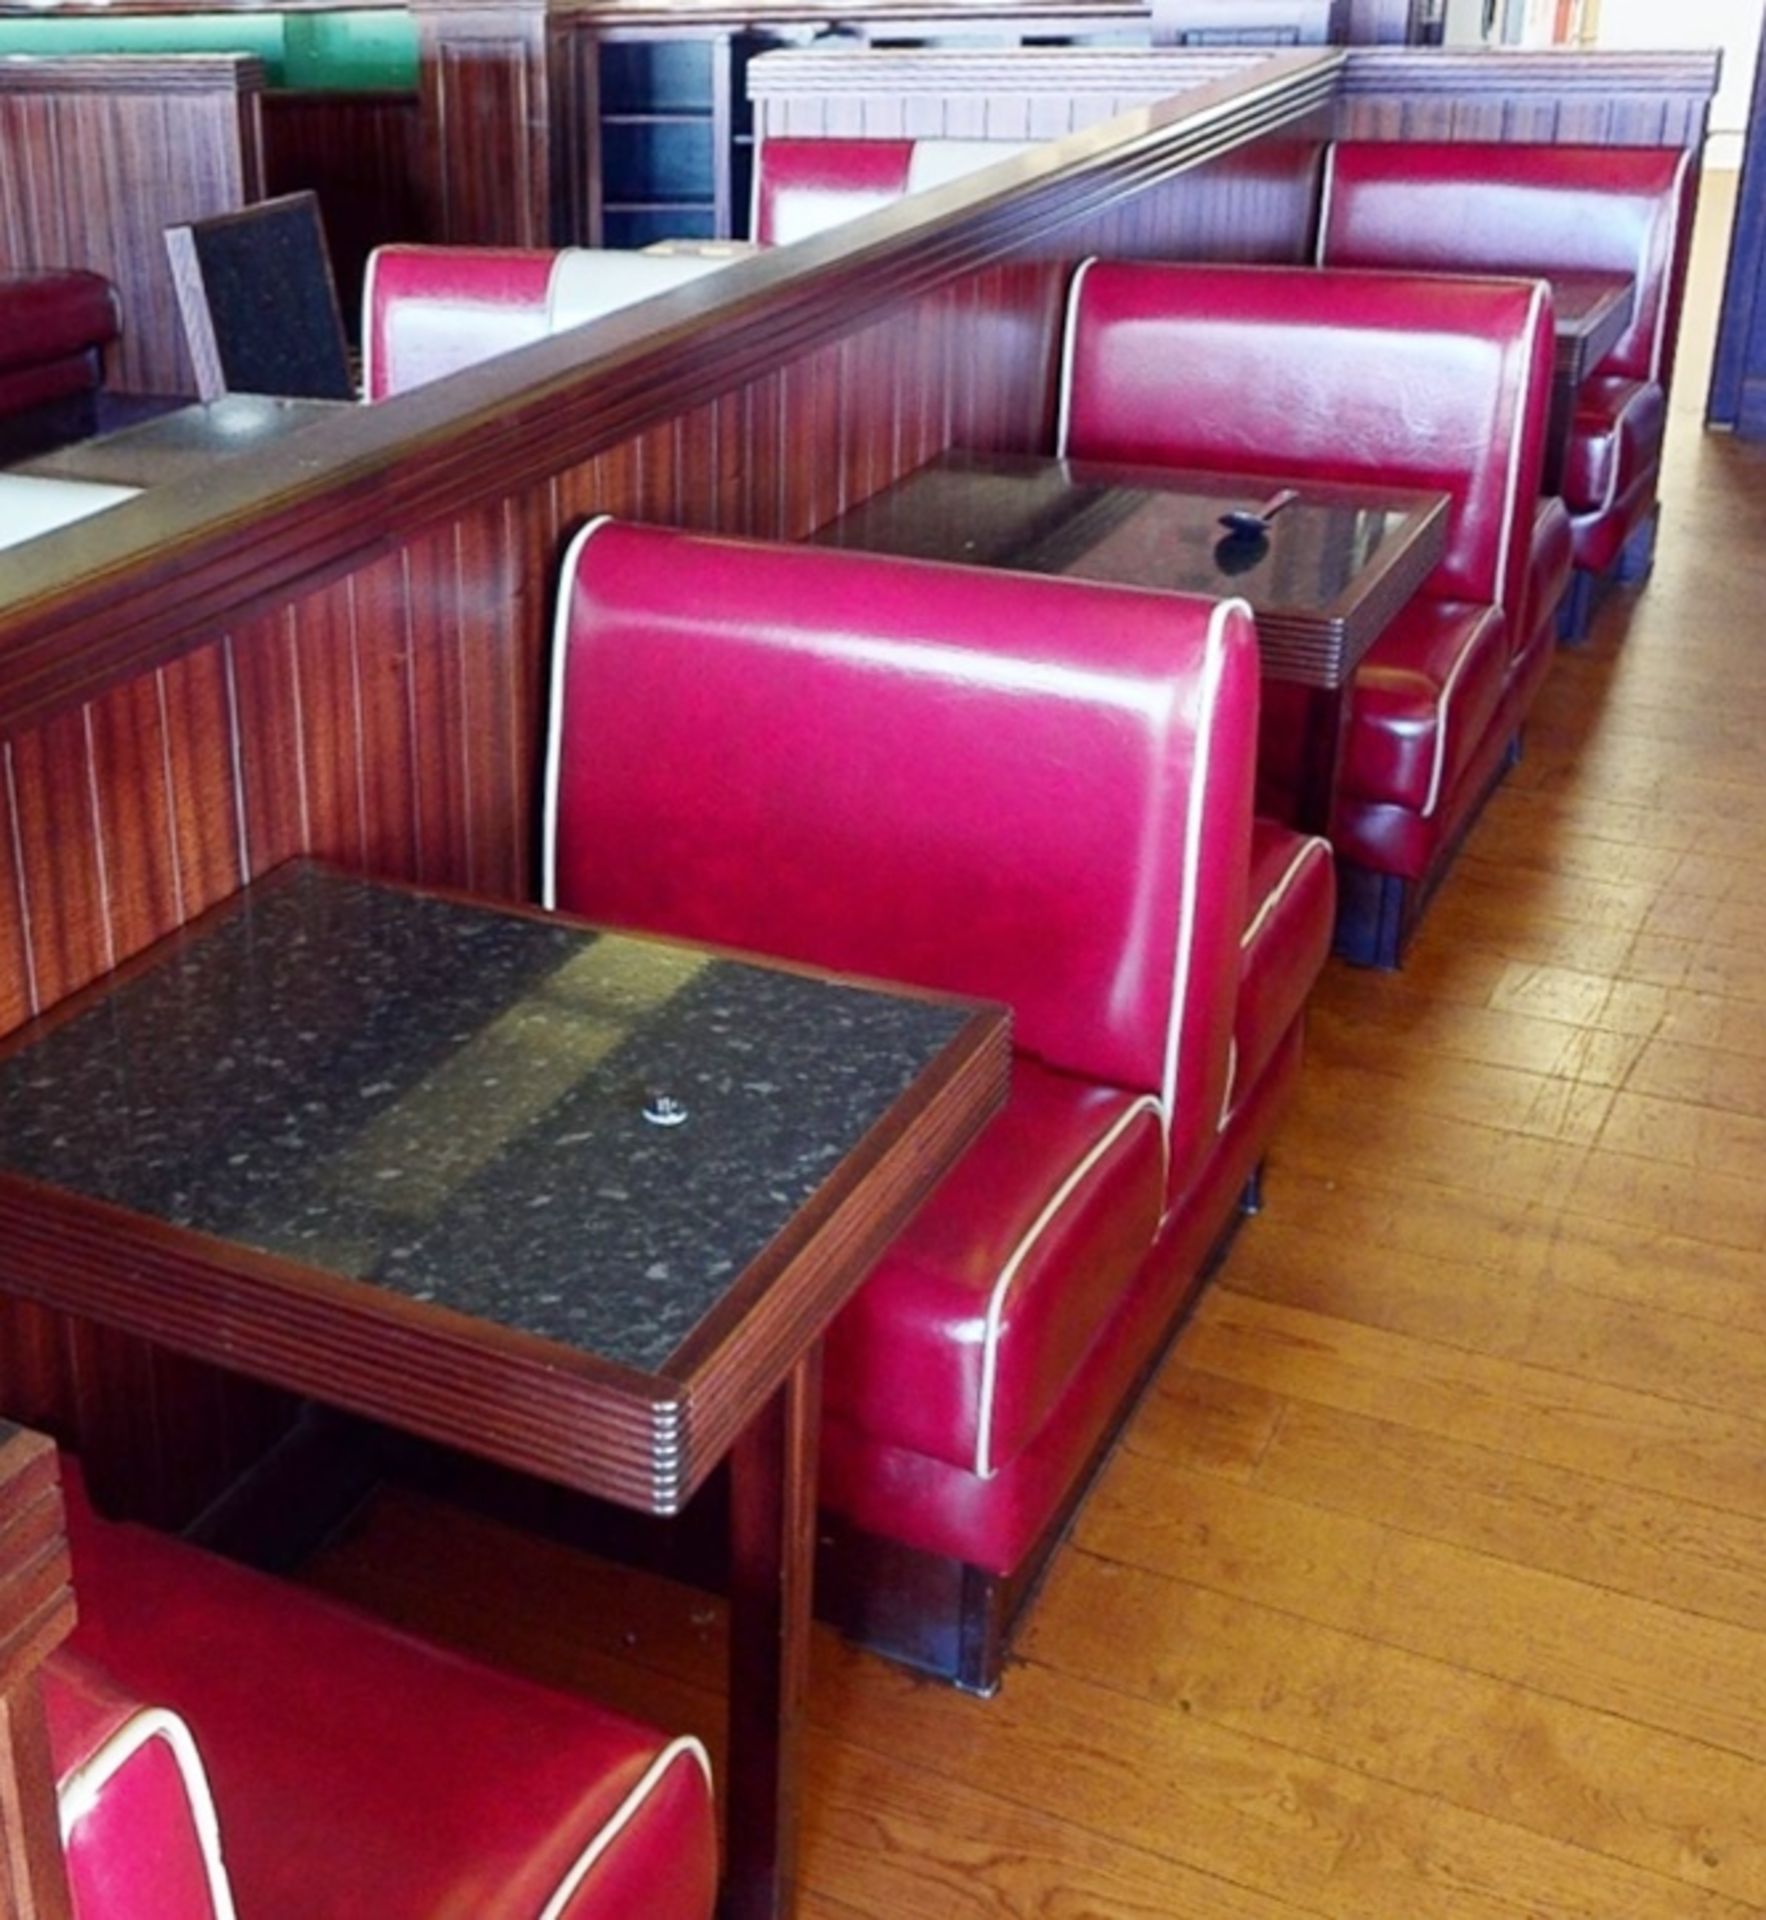 1 x Assorted Lot of Restaurant Seating Benches - Seats 18 Persons - American Diner Style in Red - Image 3 of 11